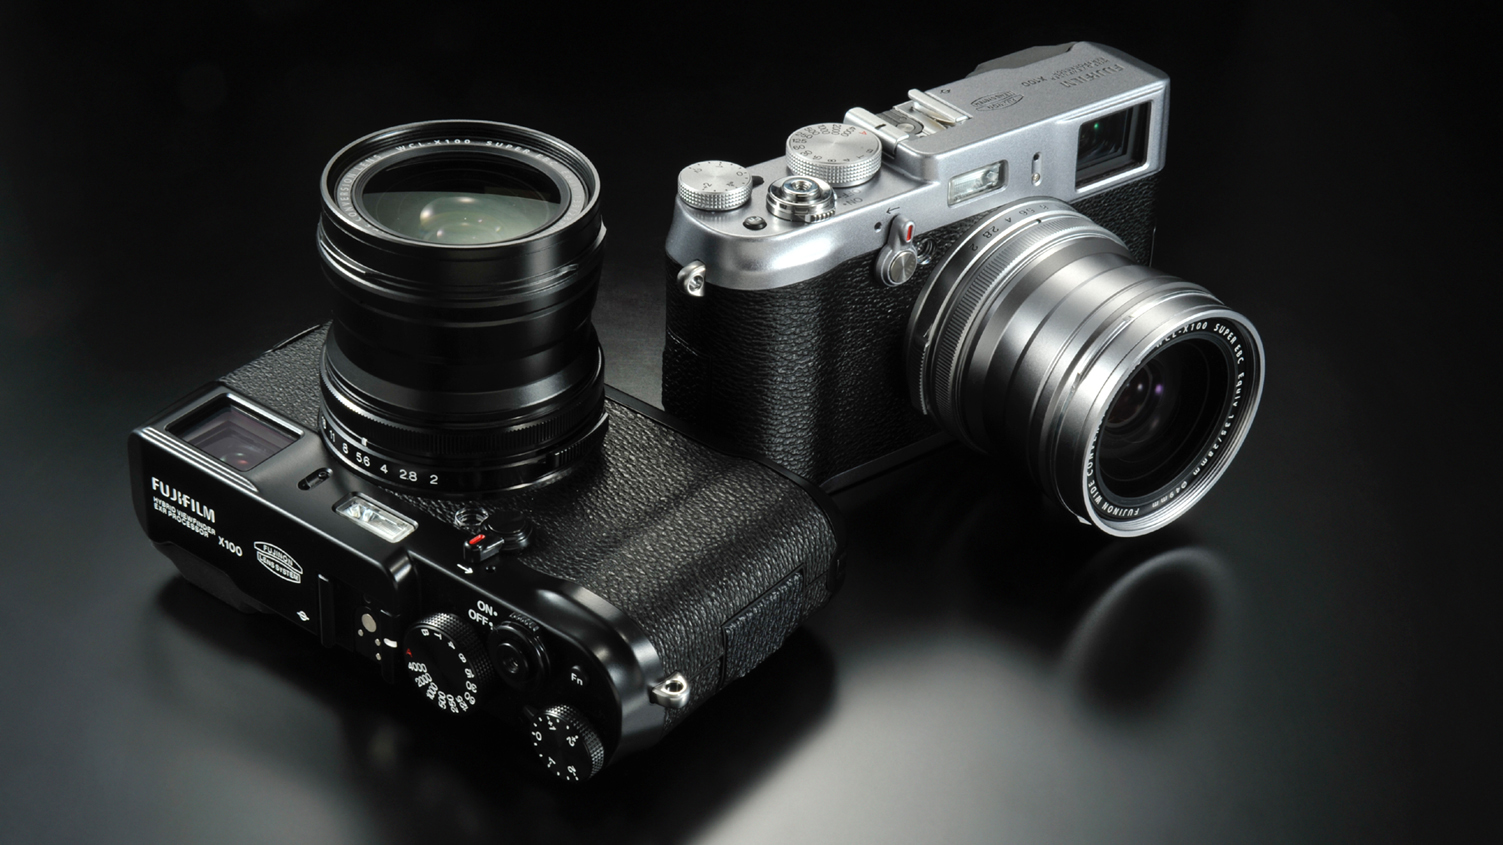 Field Review: Fujifilm X100 (Day 1) - The Phoblographer